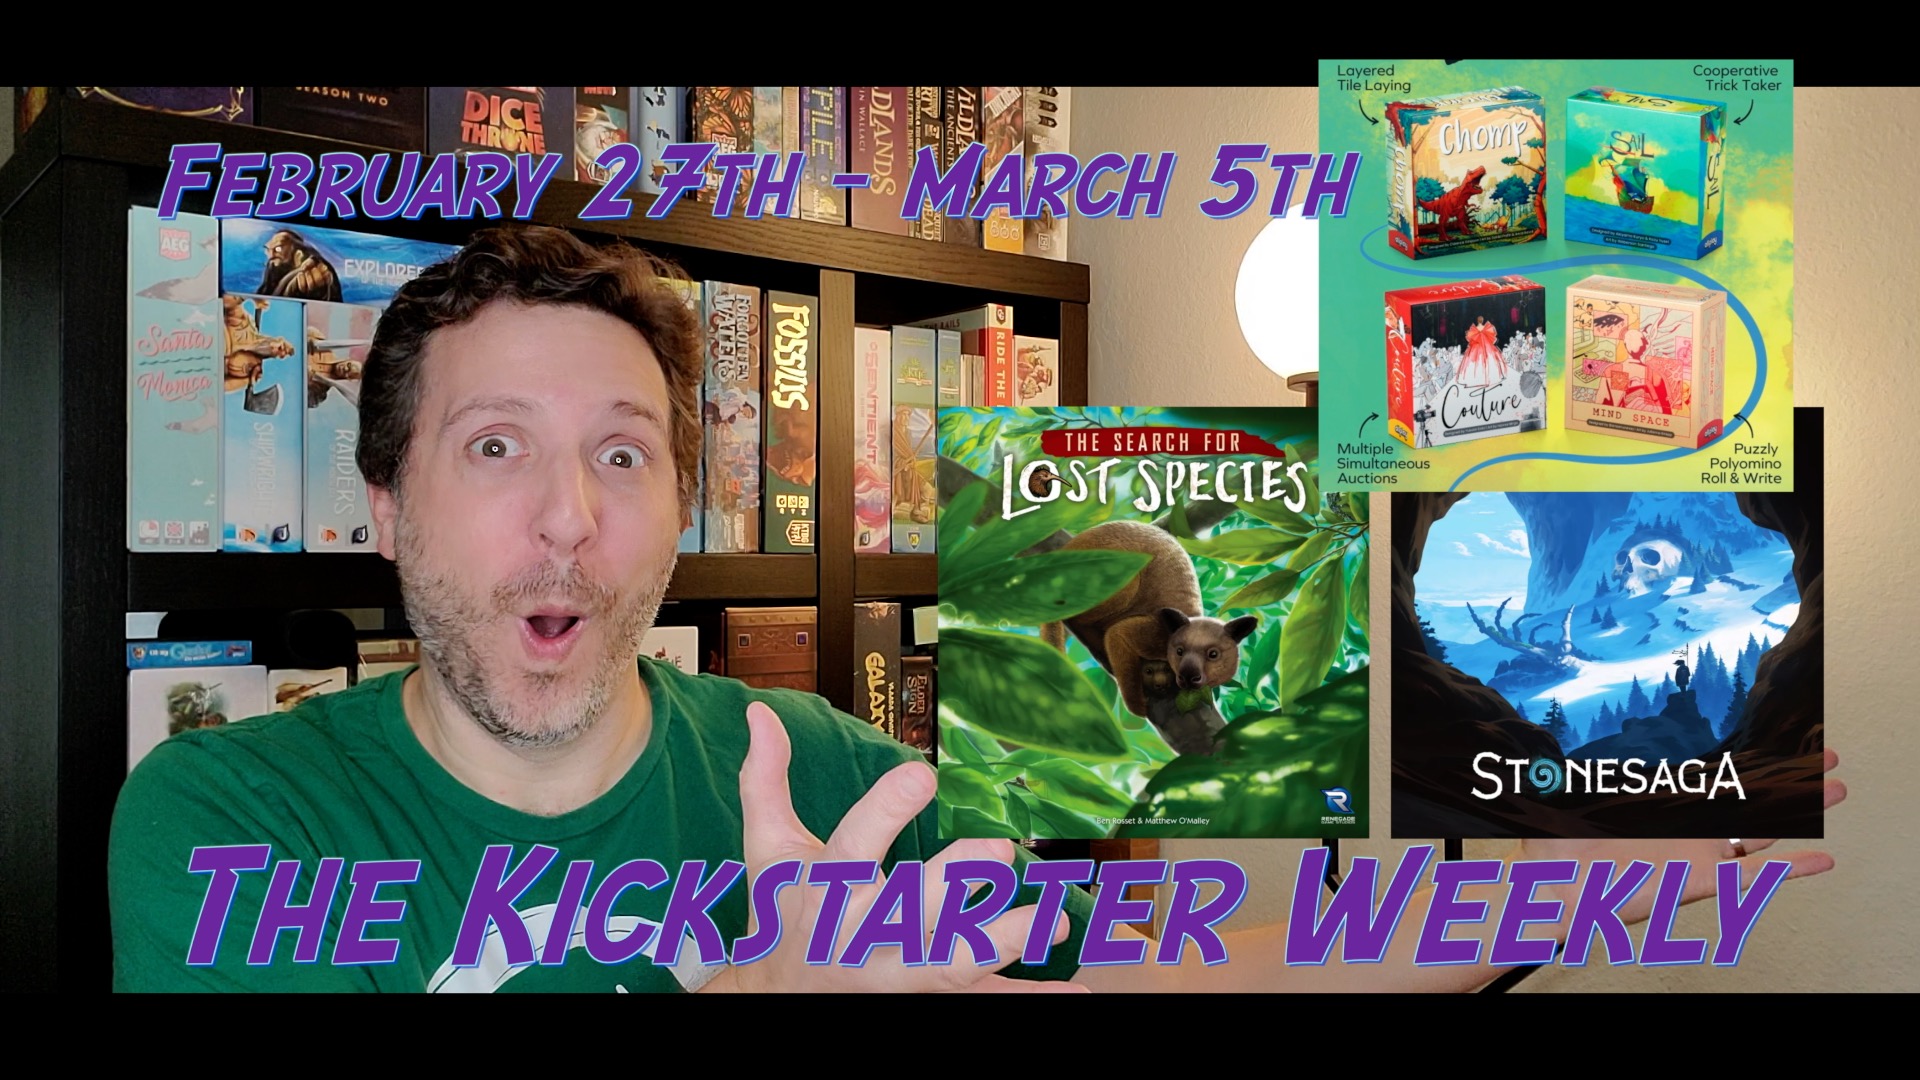 The Kickstarter Weekly, February 27th – March 5th